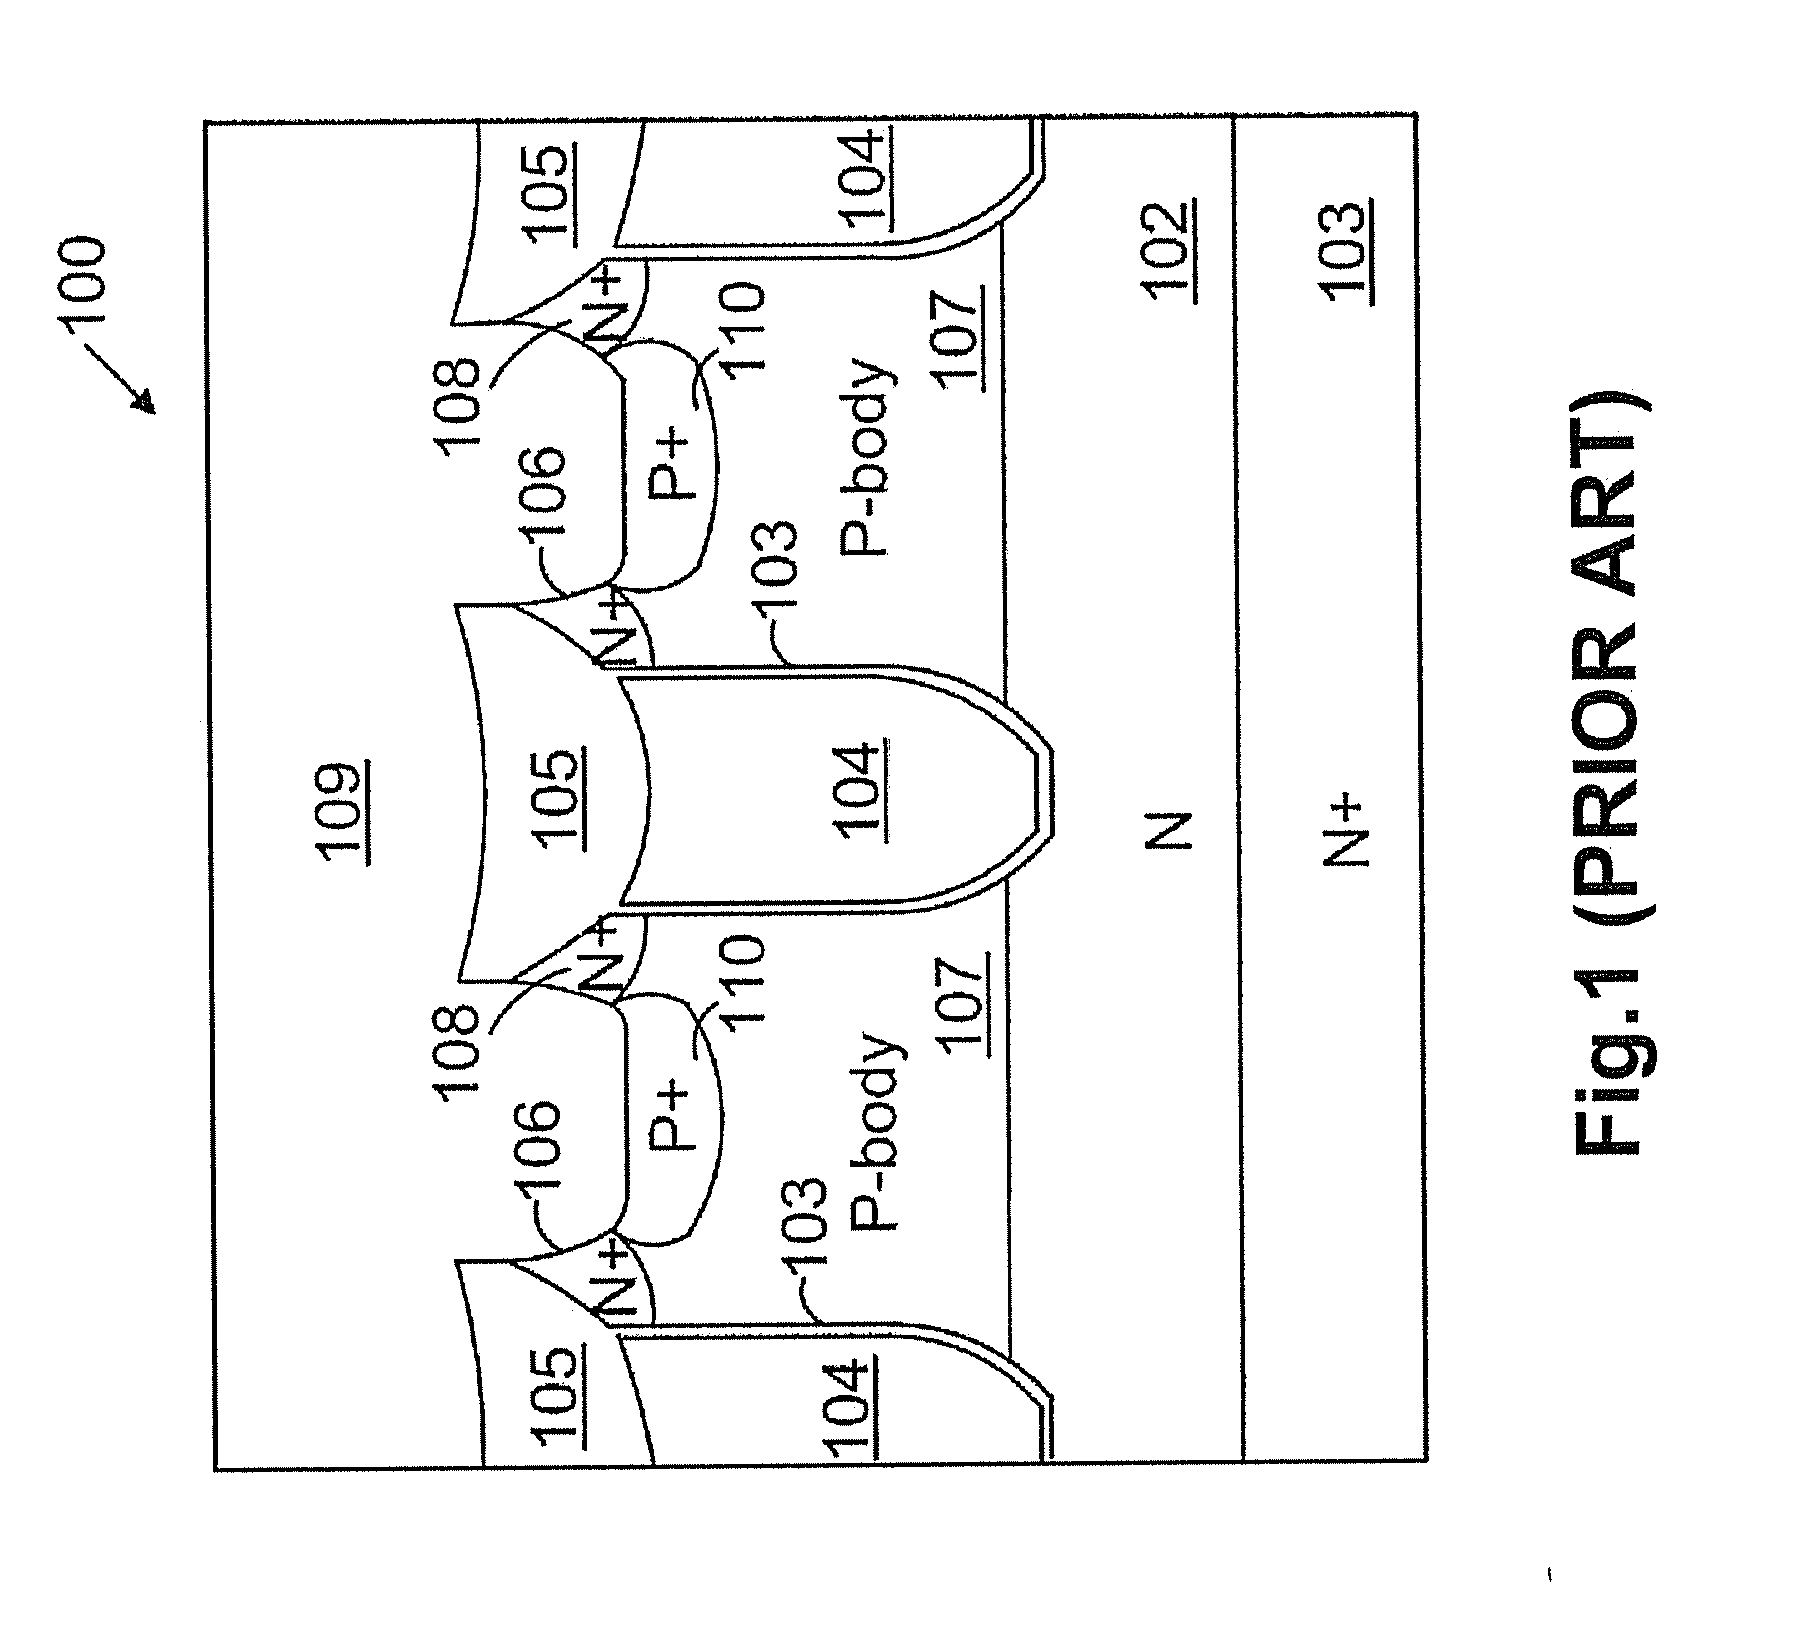 Trench mosfet with super pinch-off regions and self-aligned trenched contact